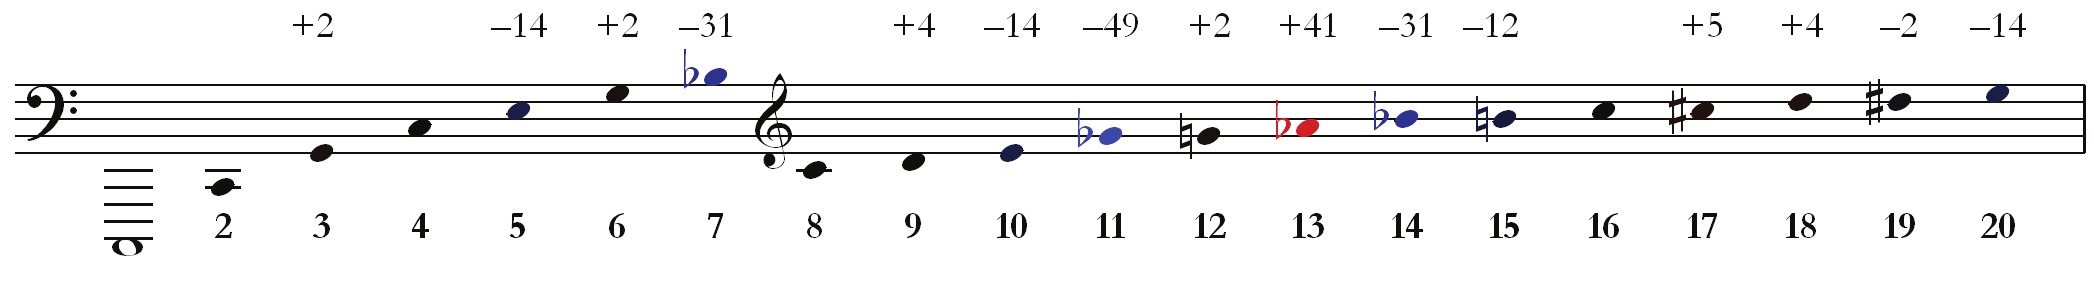 An illustration of the harmonic series in musical notation. Starting on 2nd C below bass clef staff, pitches ascend C, C, G, C, E, G, B-flat, C, D, E, G-flat, G, A-flat, B-flat, B, C